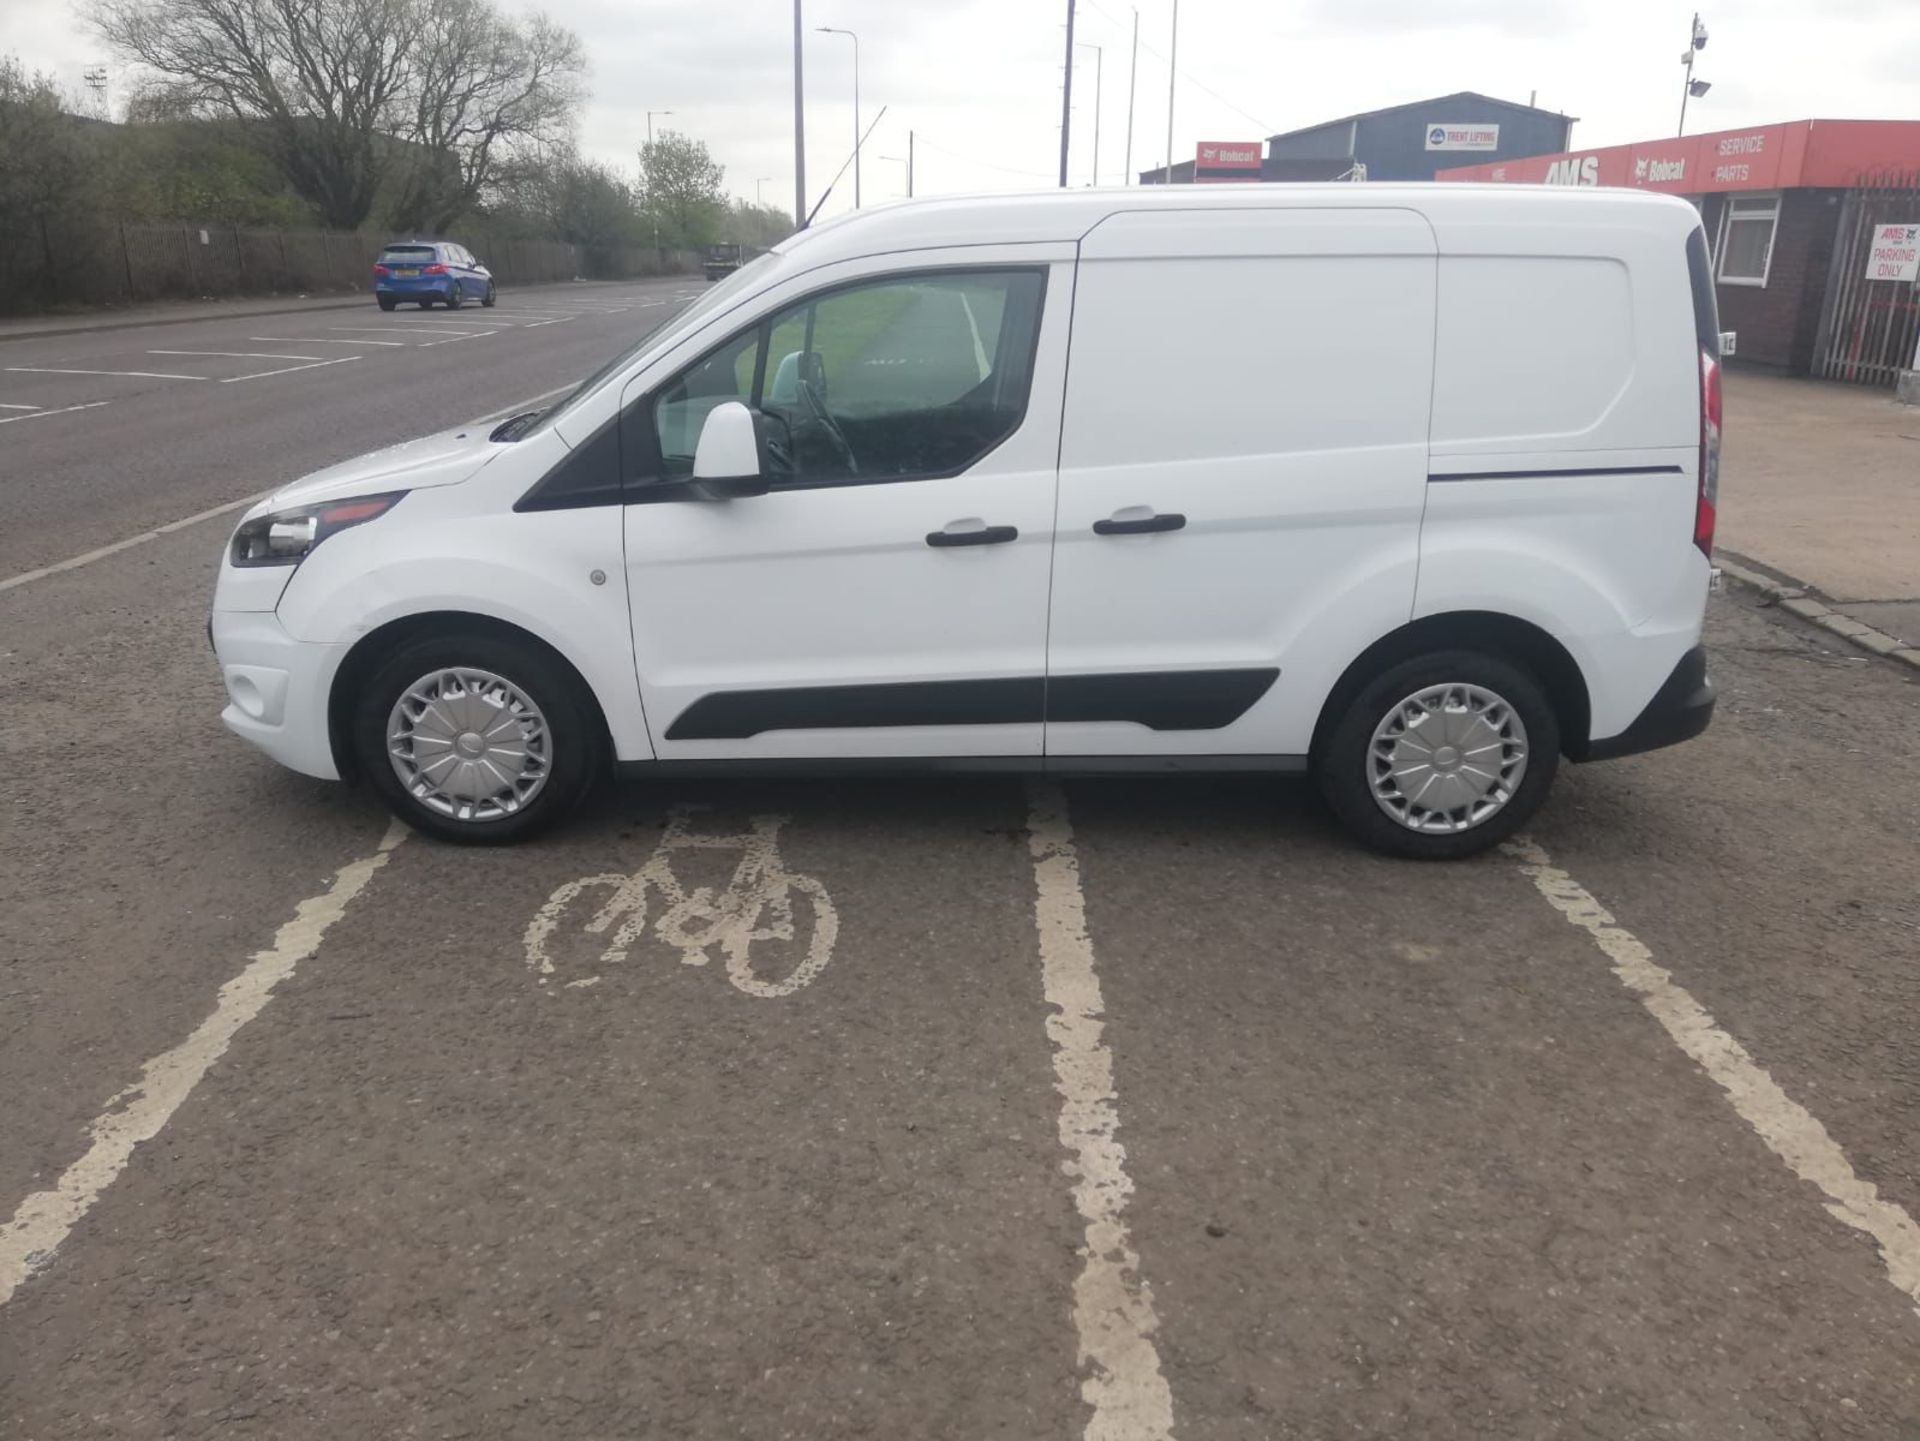 2017 17 FORD TRANSIT CONNECT PANEL VAN - EURO 6 - 145K MILES - PLY LINED. - Image 4 of 10